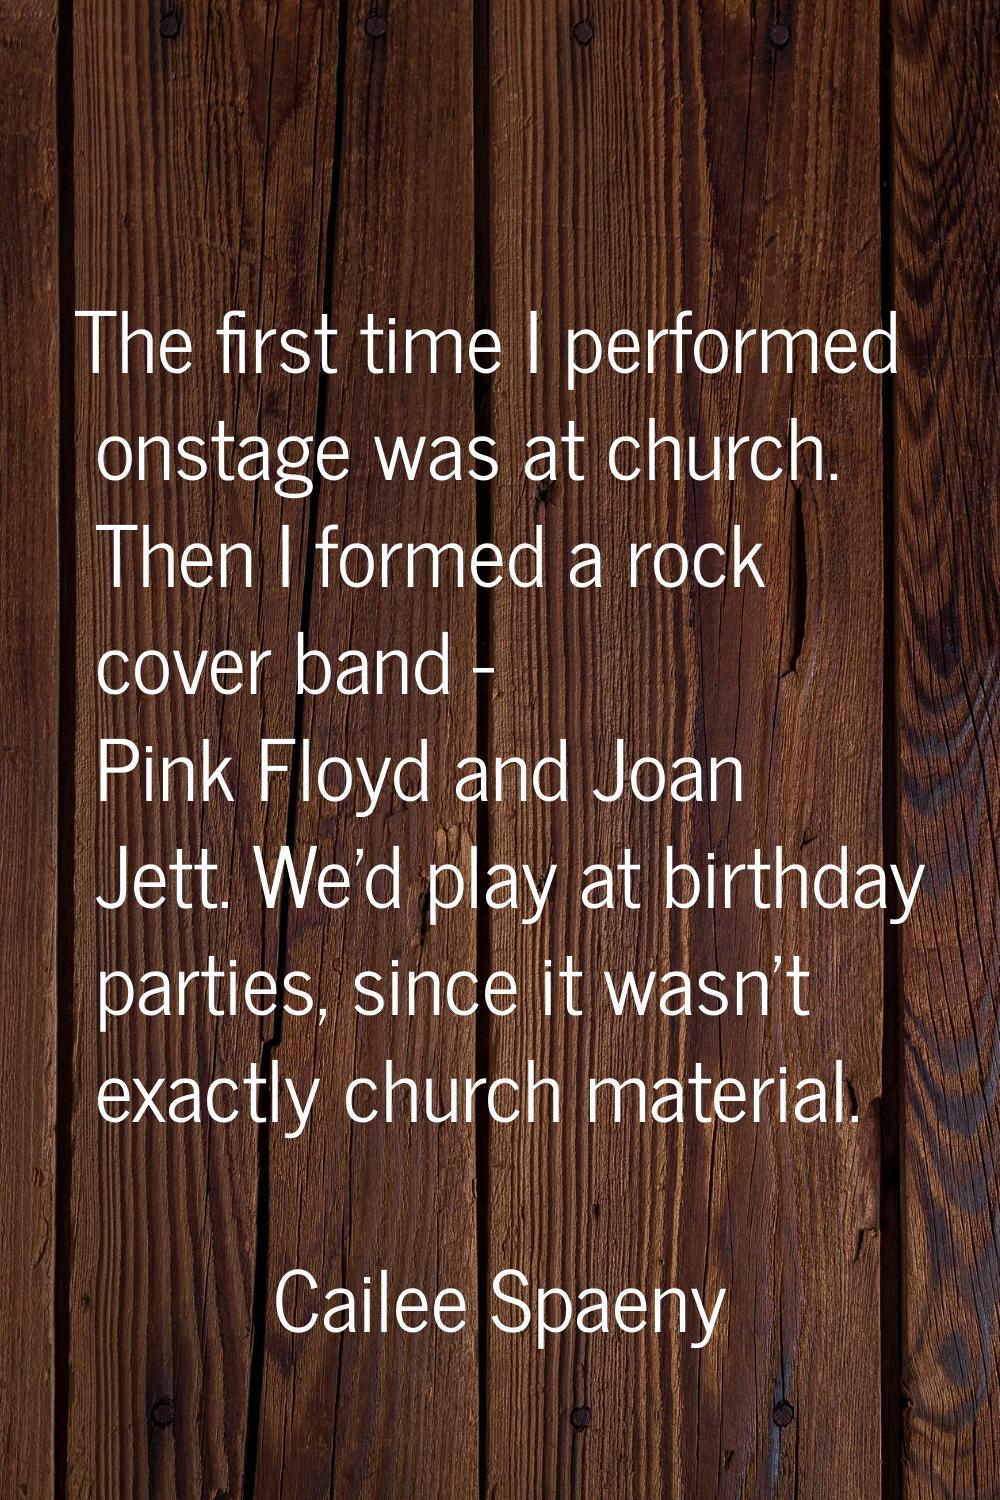 The first time I performed onstage was at church. Then I formed a rock cover band - Pink Floyd and 